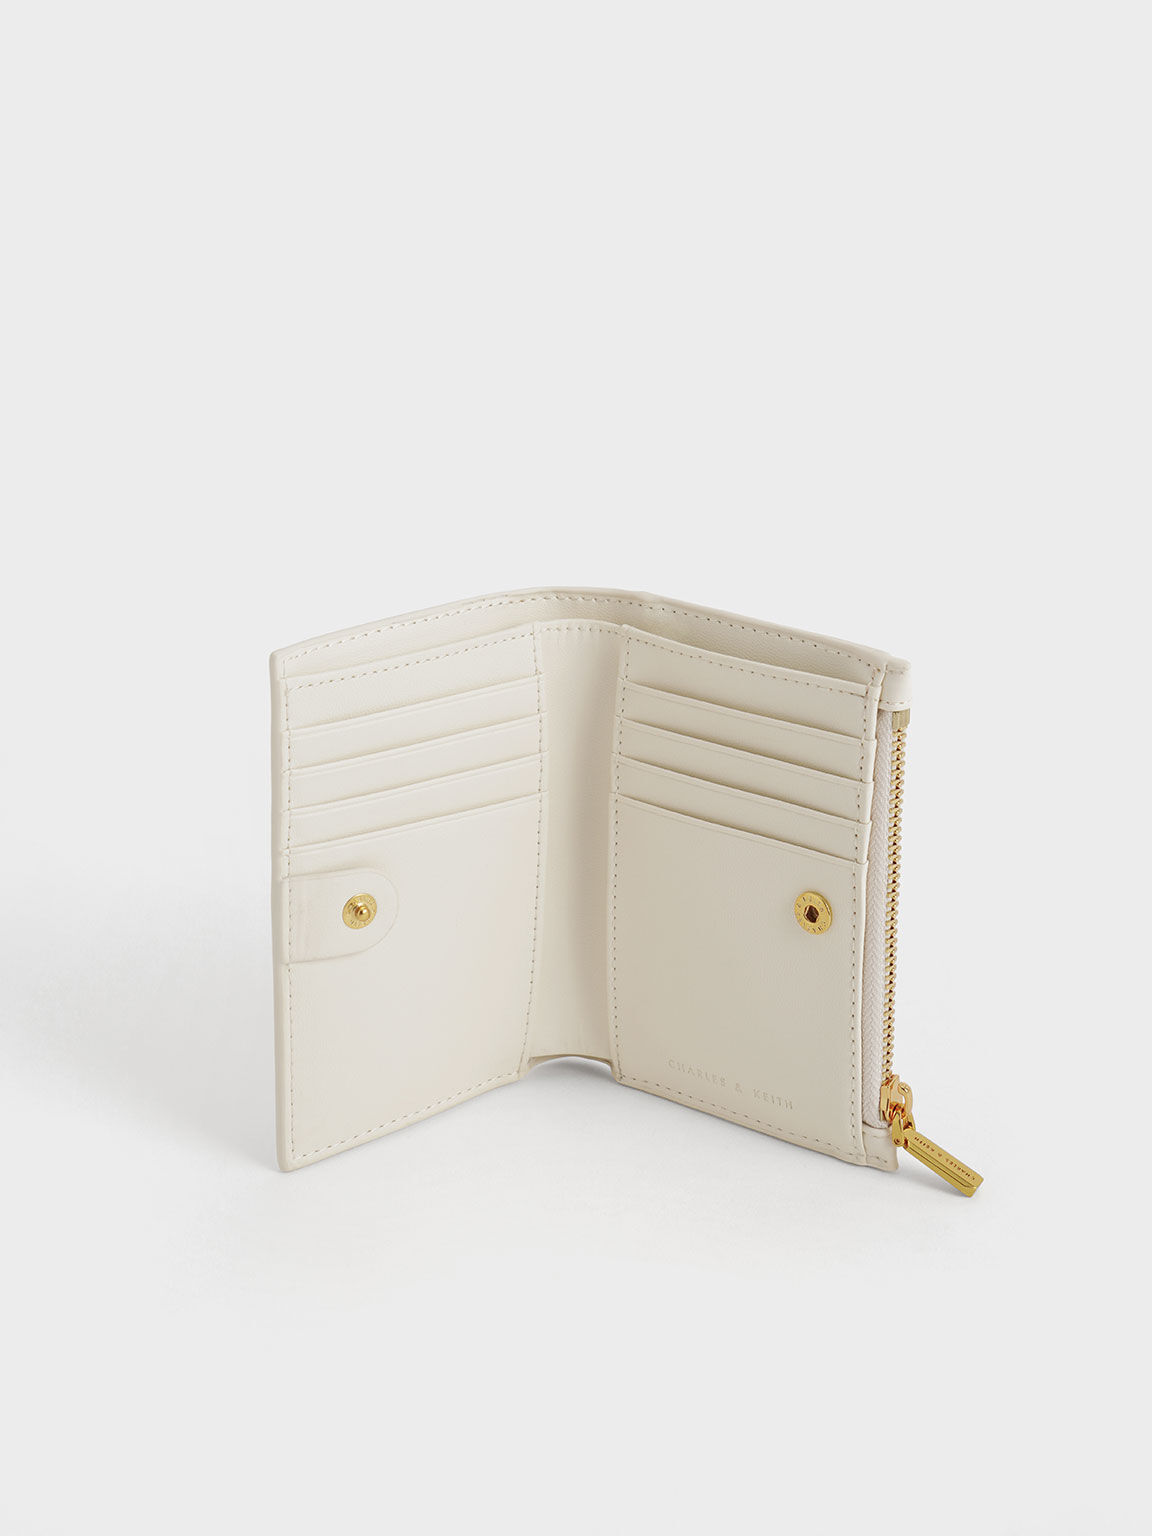 Lillie Quilted Mini Wallet, Cream, hi-res